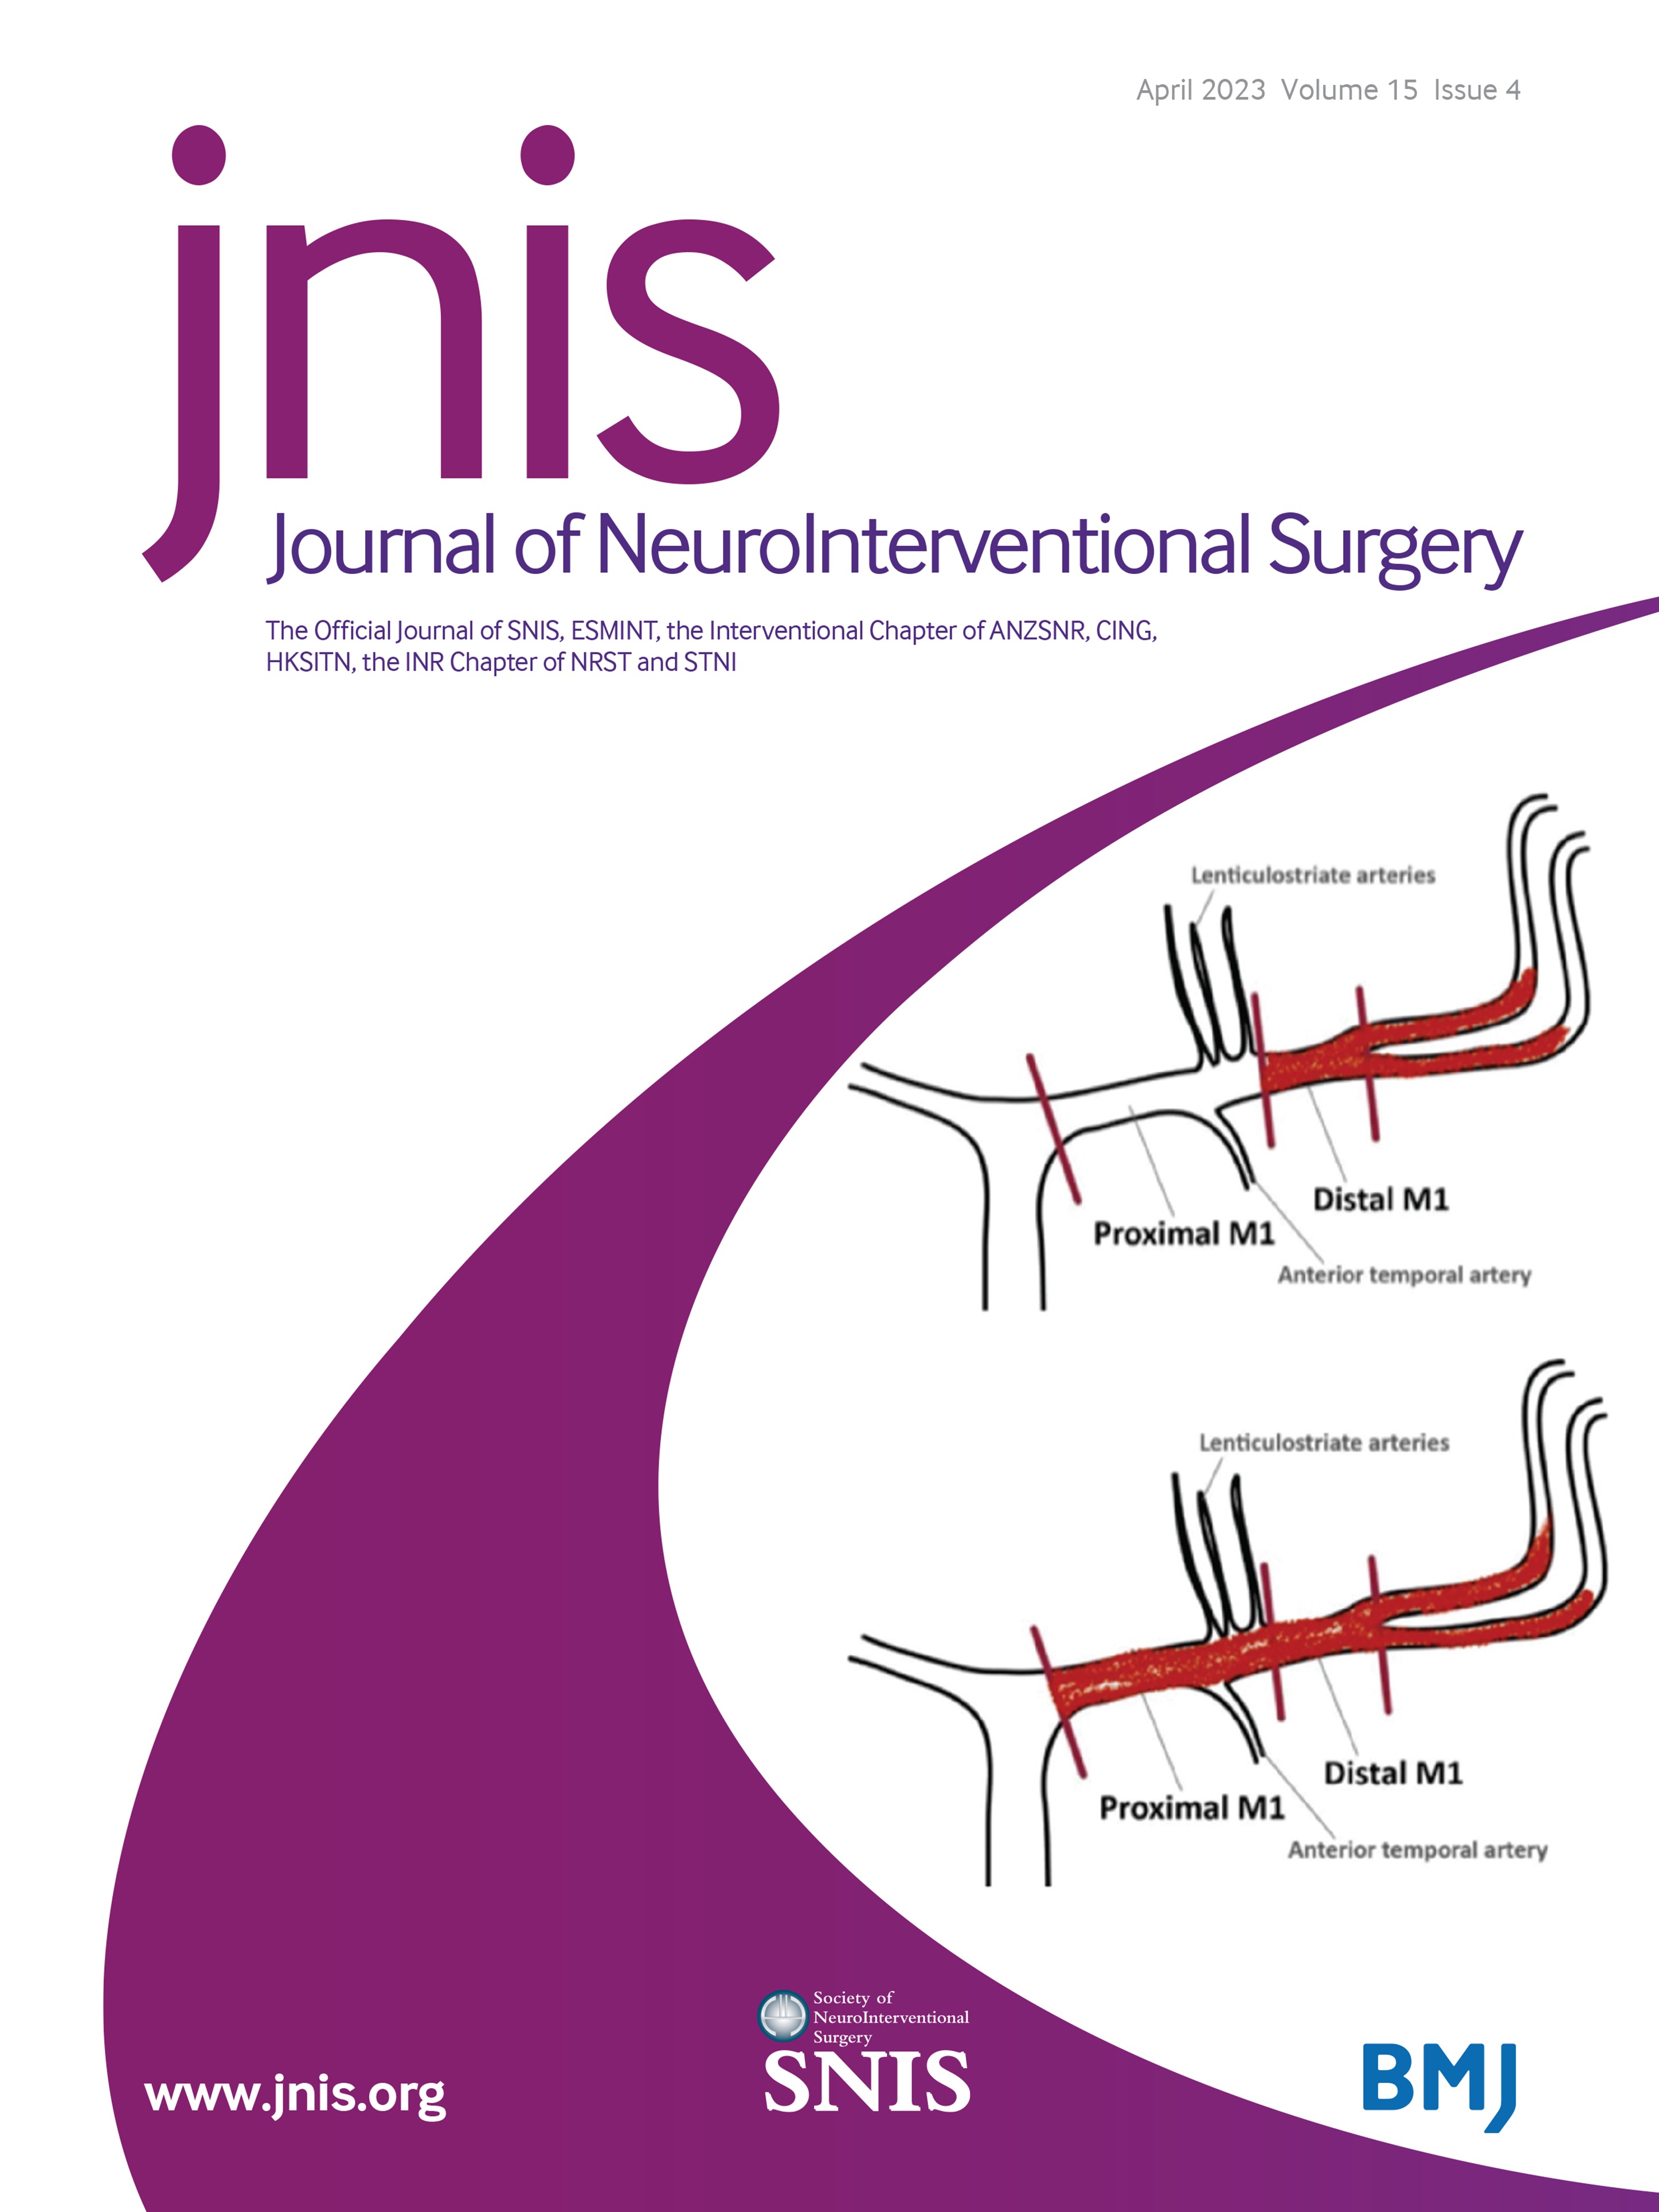 Antithrombotic therapies for neurointerventional surgery: a 2021 French comprehensive national survey